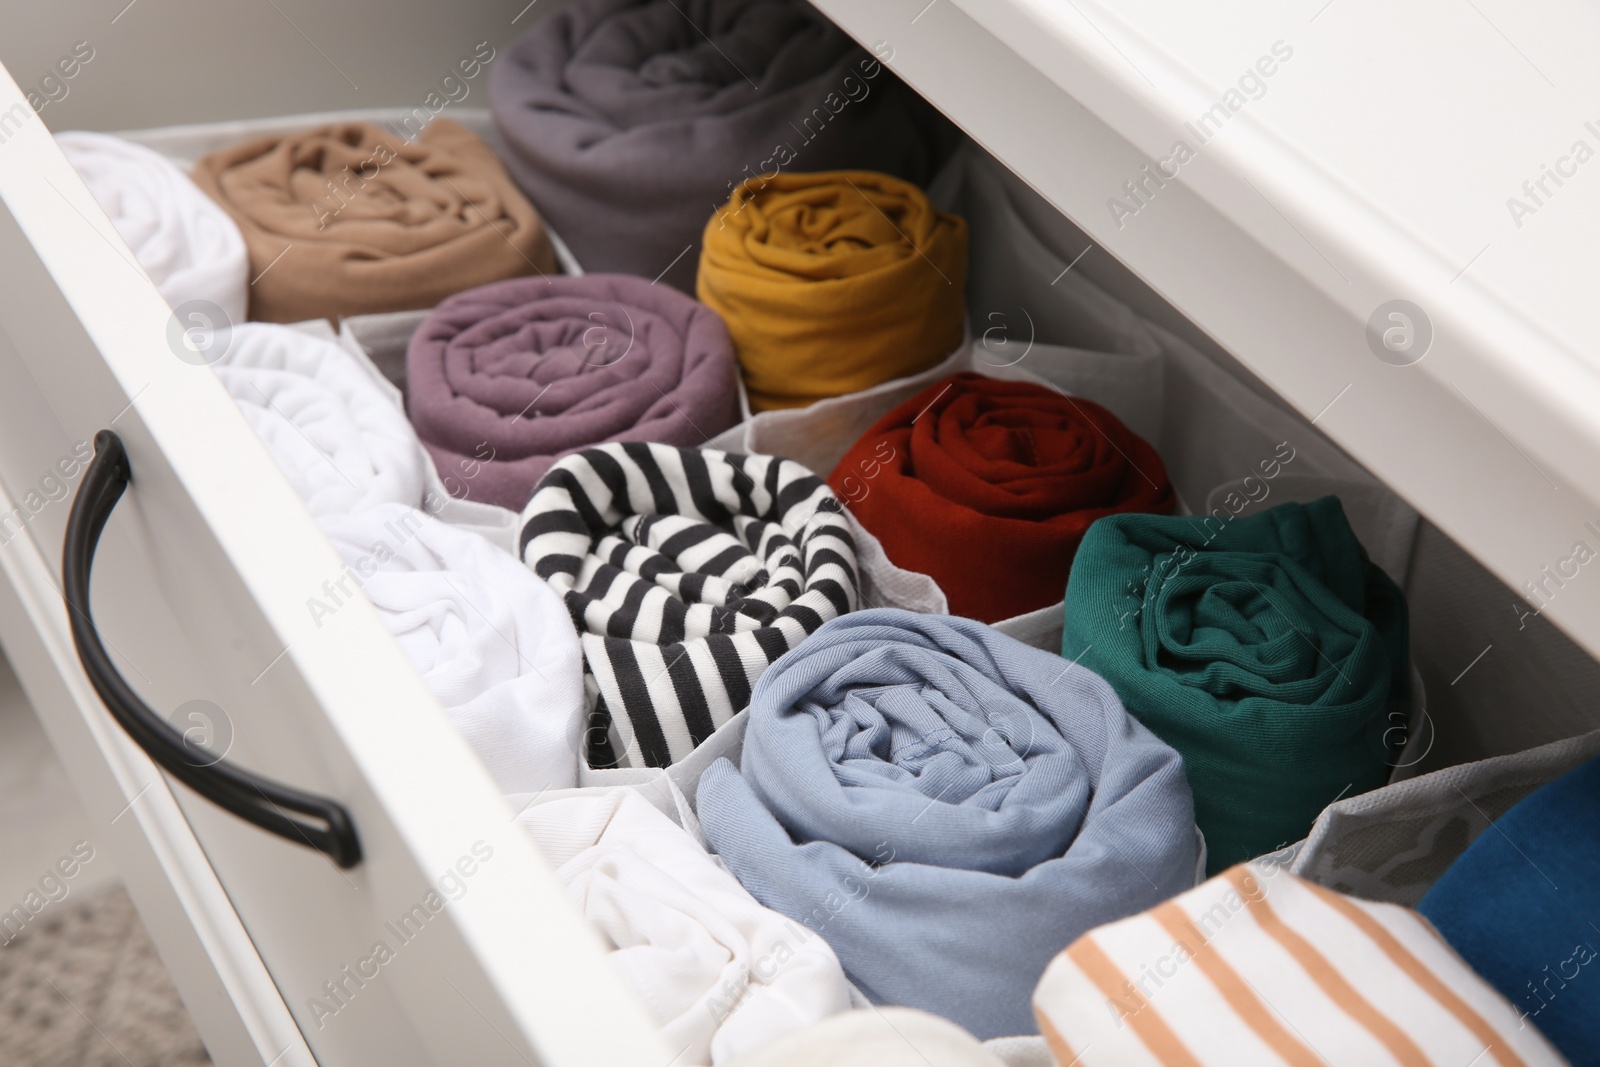 Photo of Open drawer with folded clothes indoors, closeup. Vertical storage